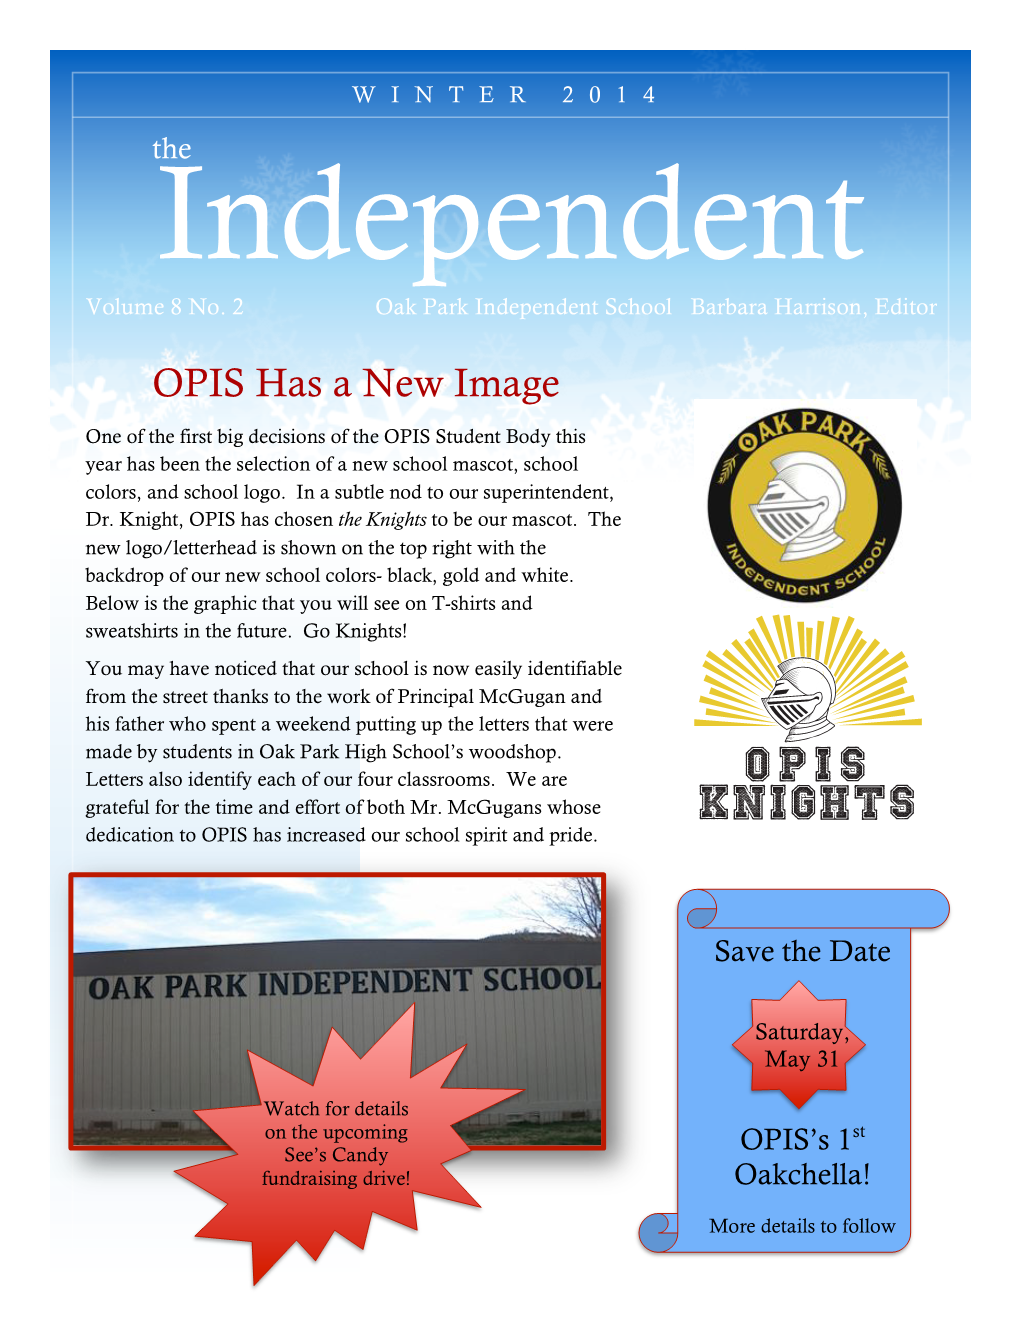 OPIS Has a New Image